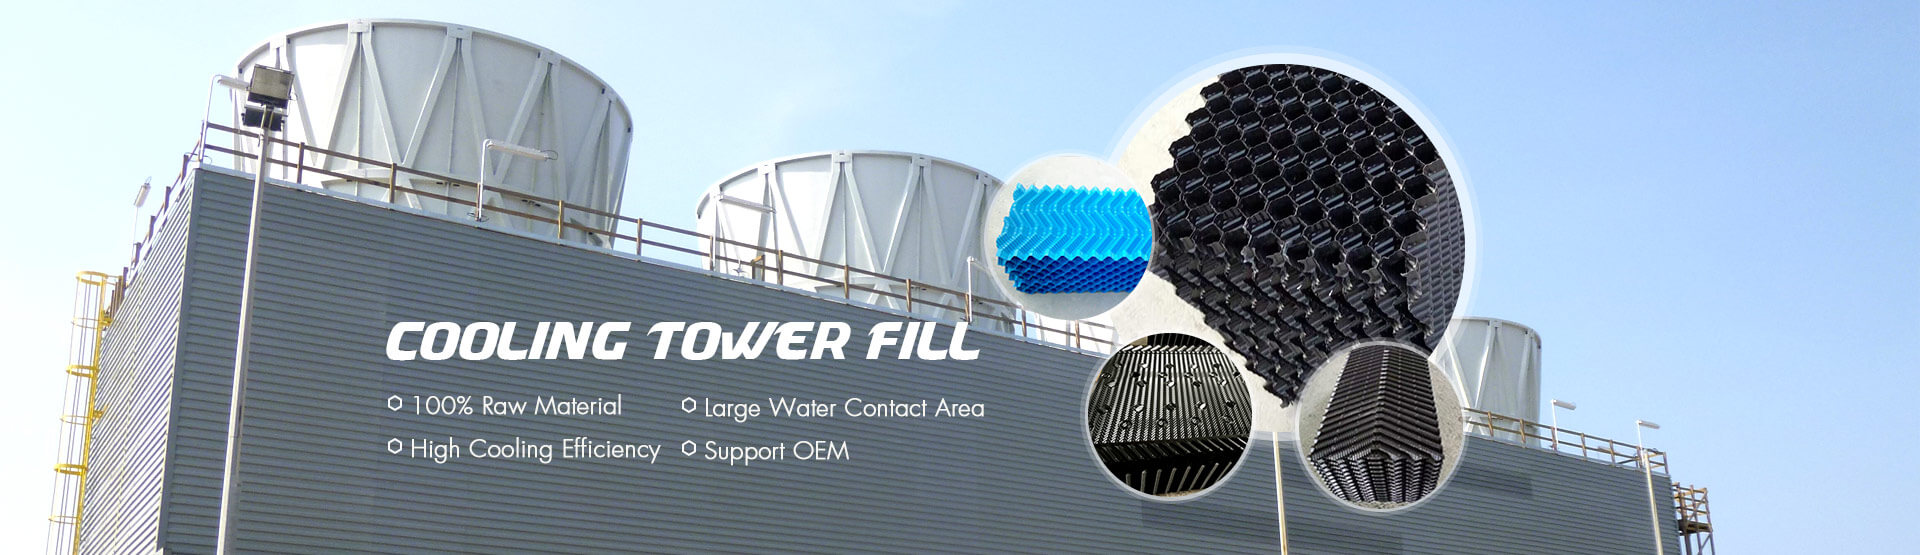 Cooling Tower Accessories